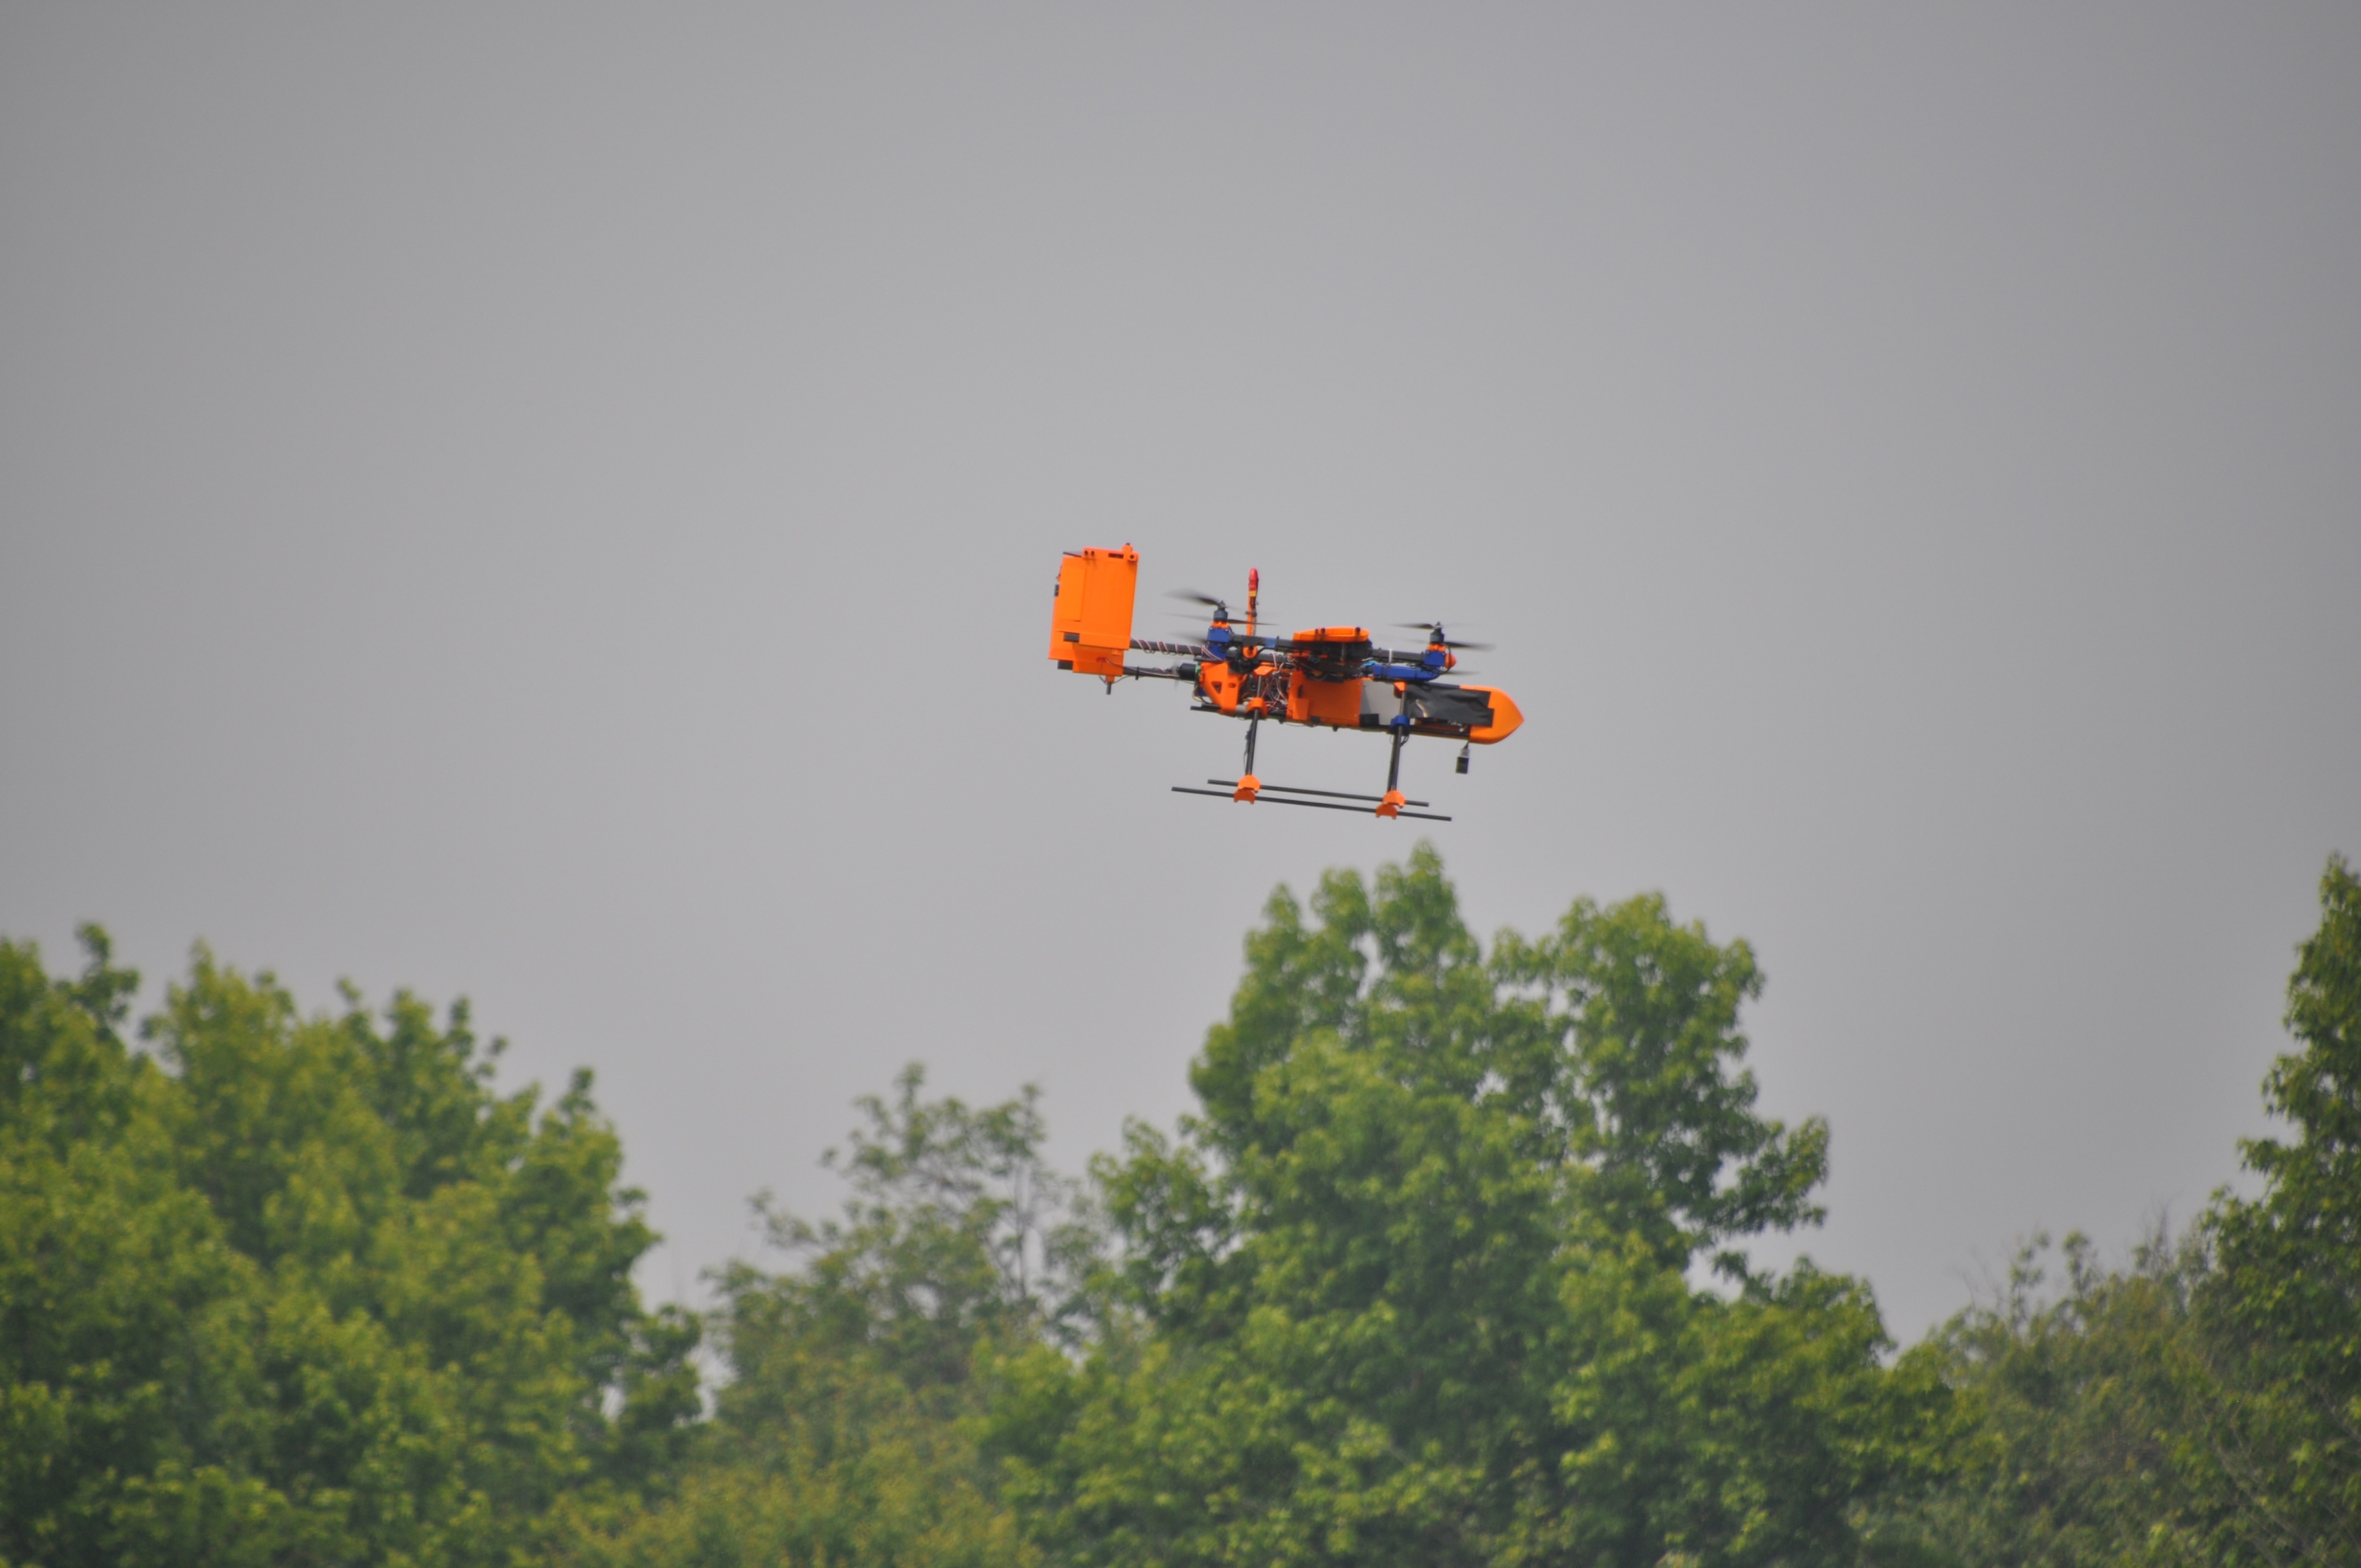 The Auburn University student team won 1st place in the 3rd VFS Design-Build-Vertical Flight Competition. The Canadian wildfires caused the smoky sky. (VFS photo)